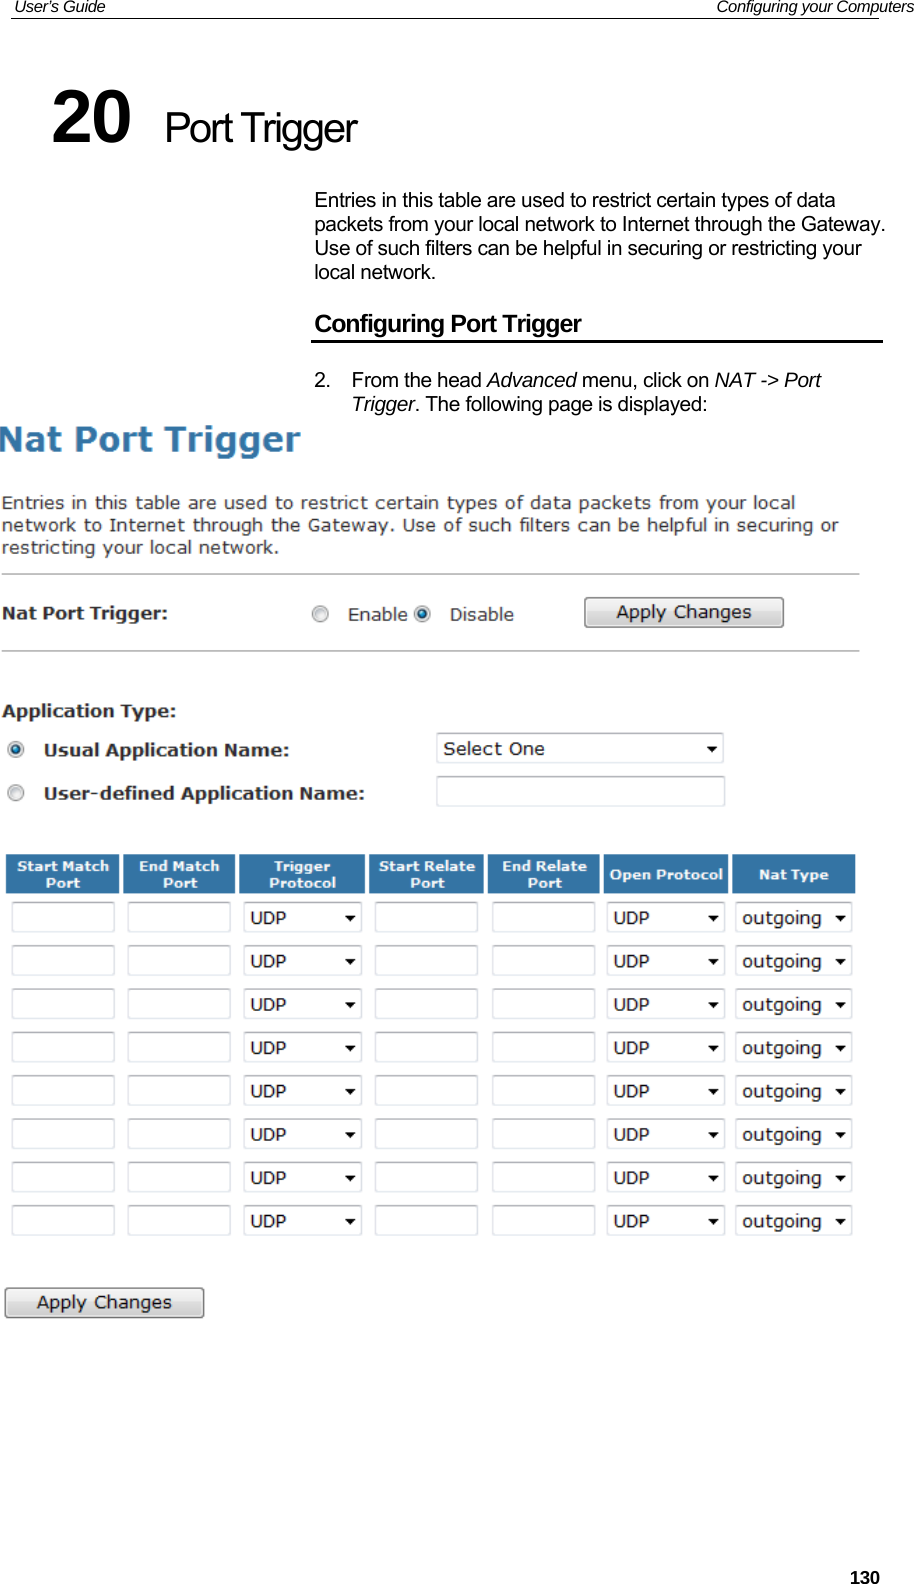 User’s Guide   Configuring your Computers 20  Port Trigger Entries in this table are used to restrict certain types of data packets from your local network to Internet through the Gateway. Use of such filters can be helpful in securing or restricting your local network. Configuring Port Trigger 2. From the head Advanced menu, click on NAT -&gt; Port Trigger. The following page is displayed:      130